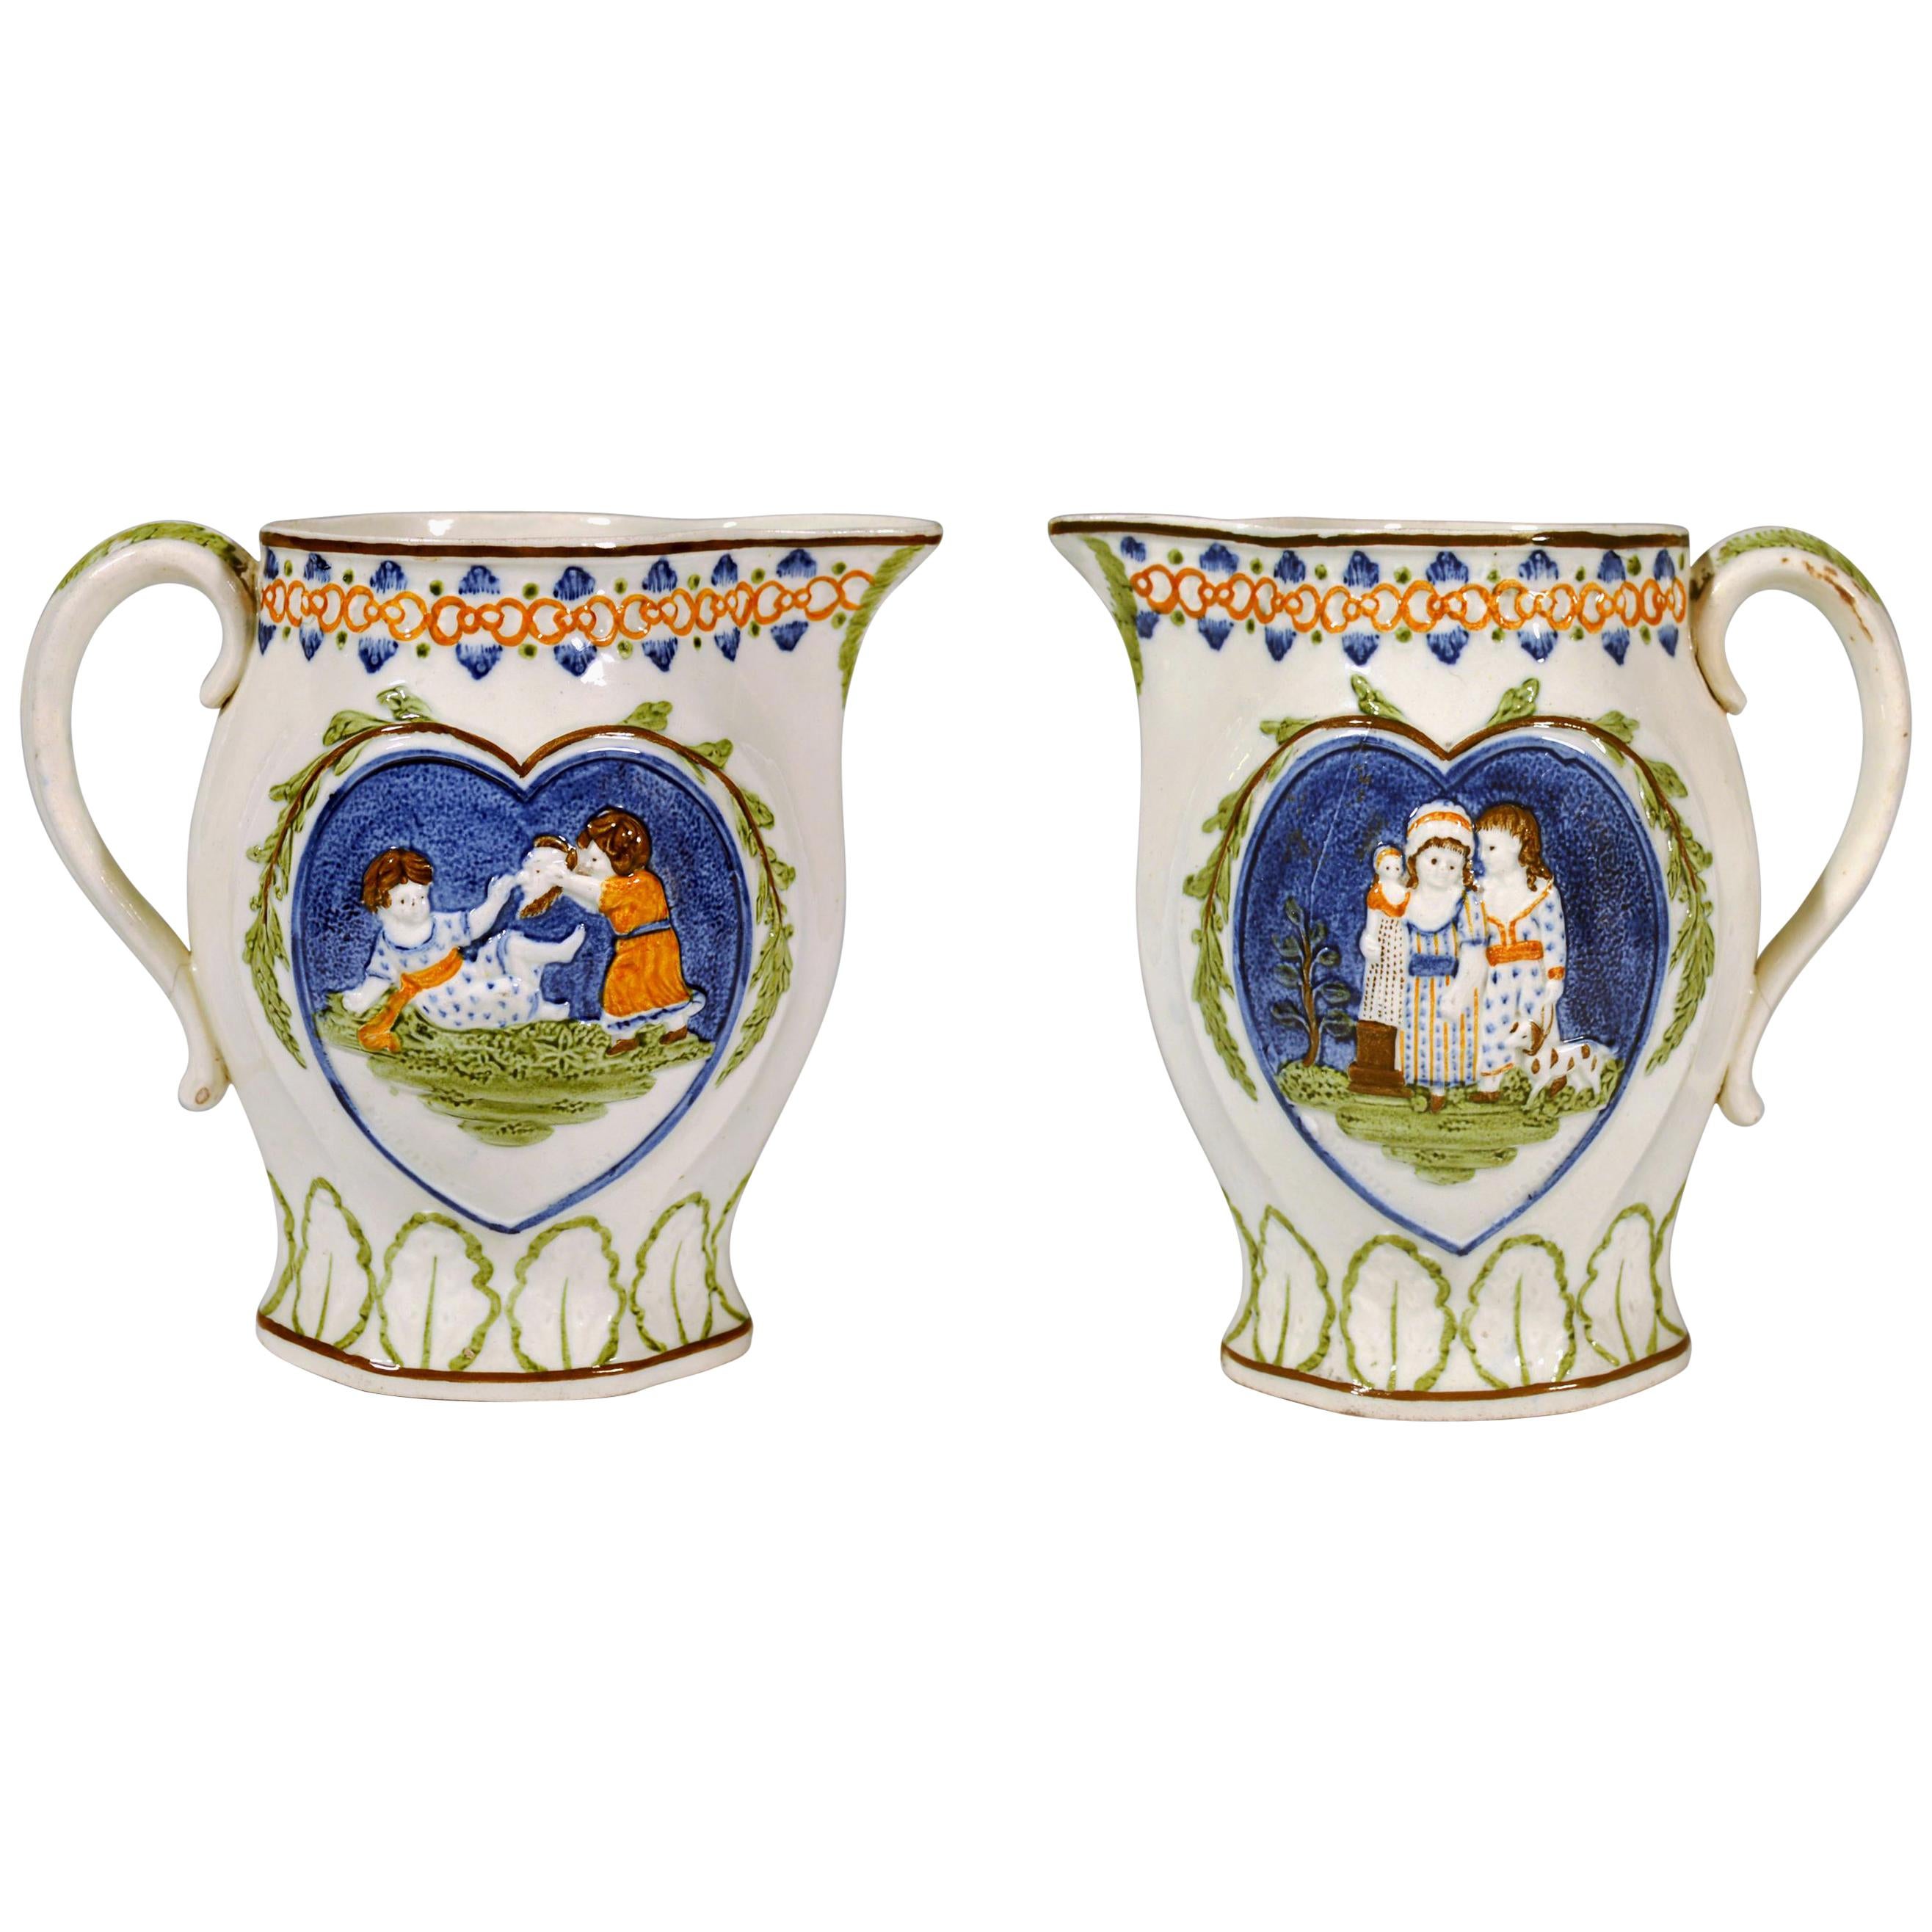 Prattware Pearlware Jug with Children with Heart-Shaped Panels, 1810-1820